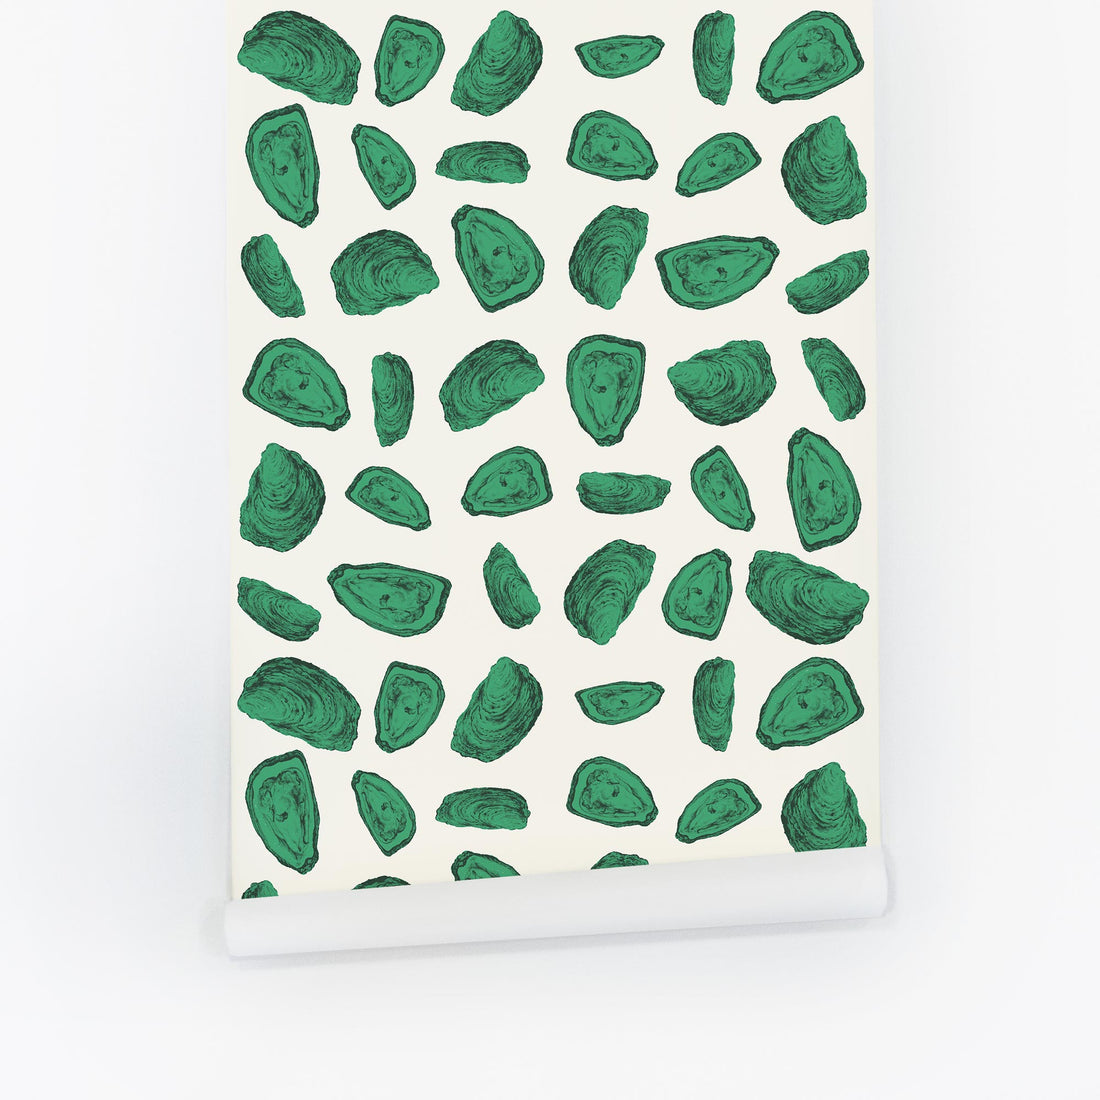 tiny abstract oyster print wallpaper design in green